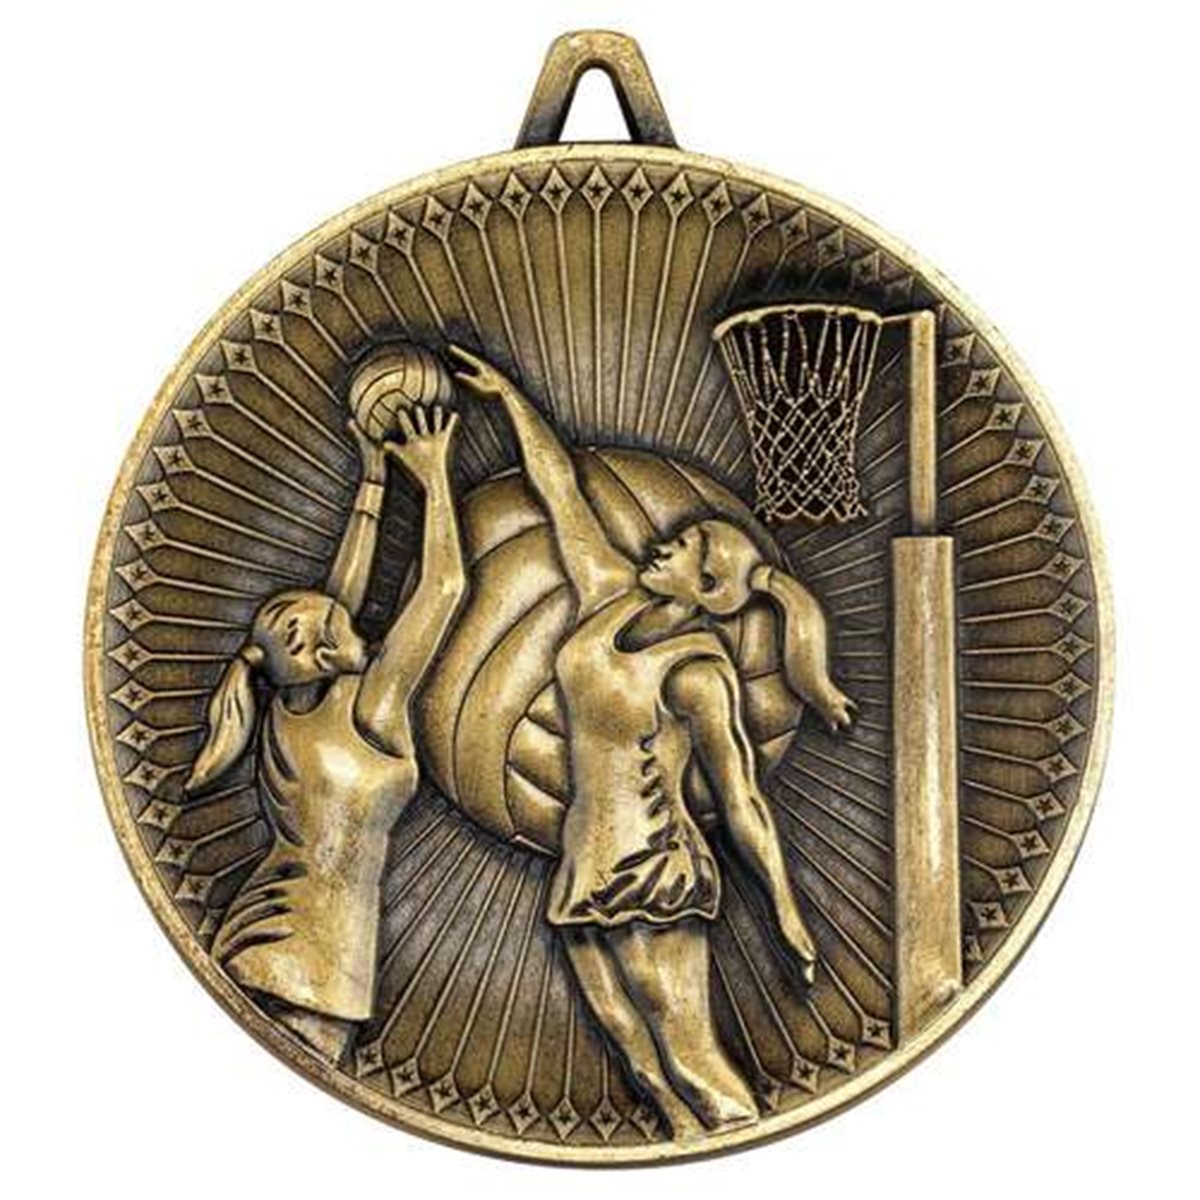 60mm Deluxe Netball Medal DM08 in Gold, Silver & Bronze